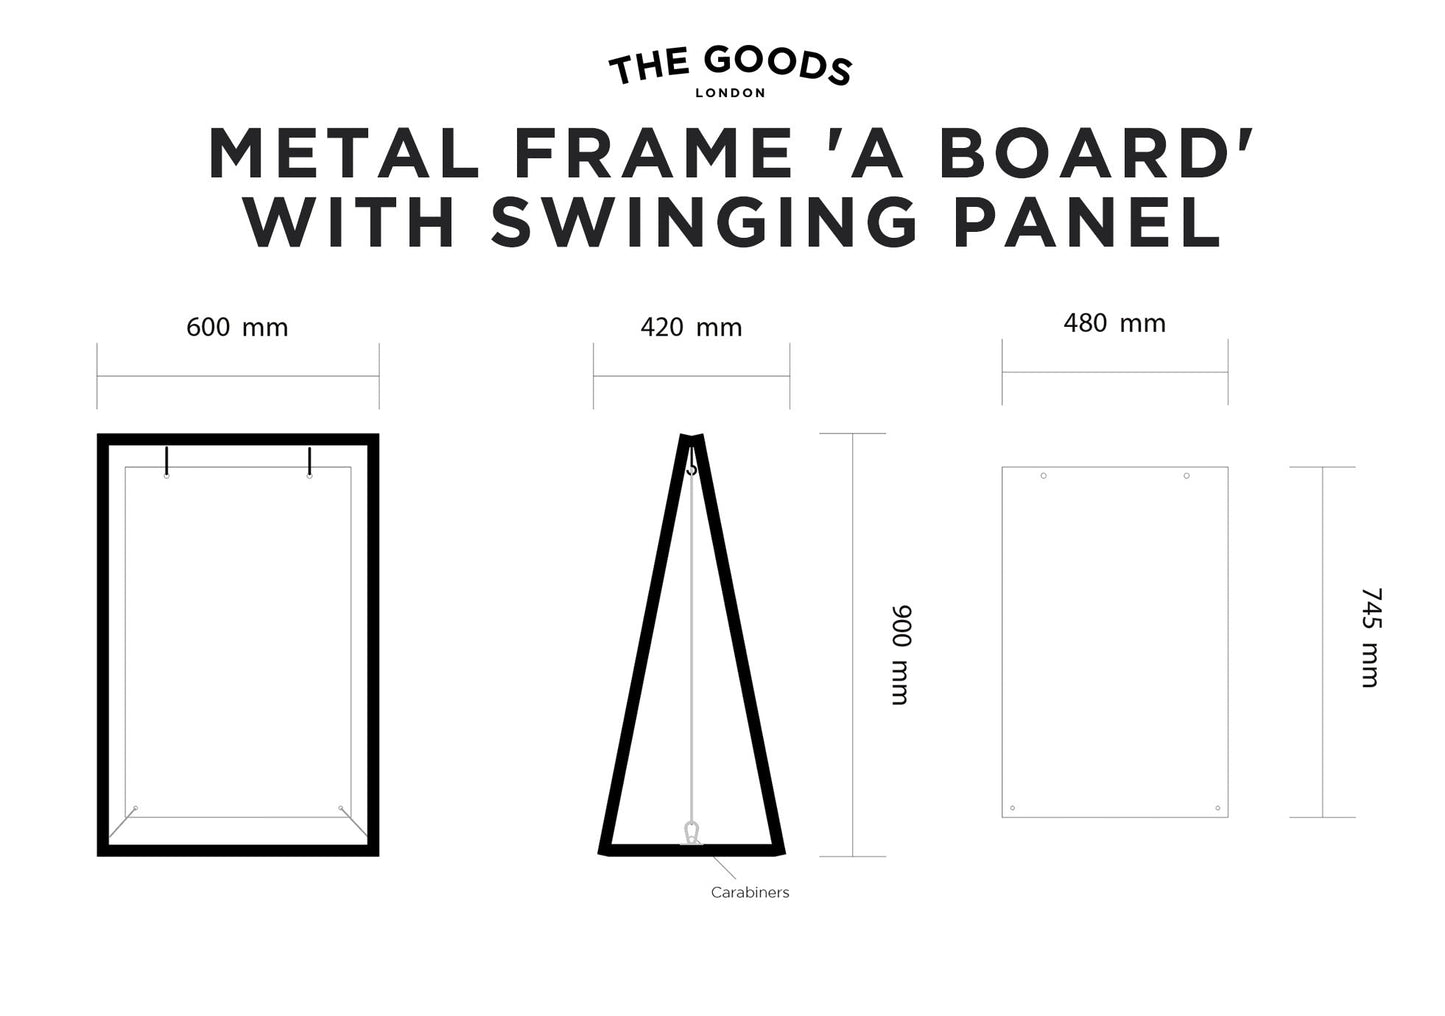 Swinging A Board Technical Drawing